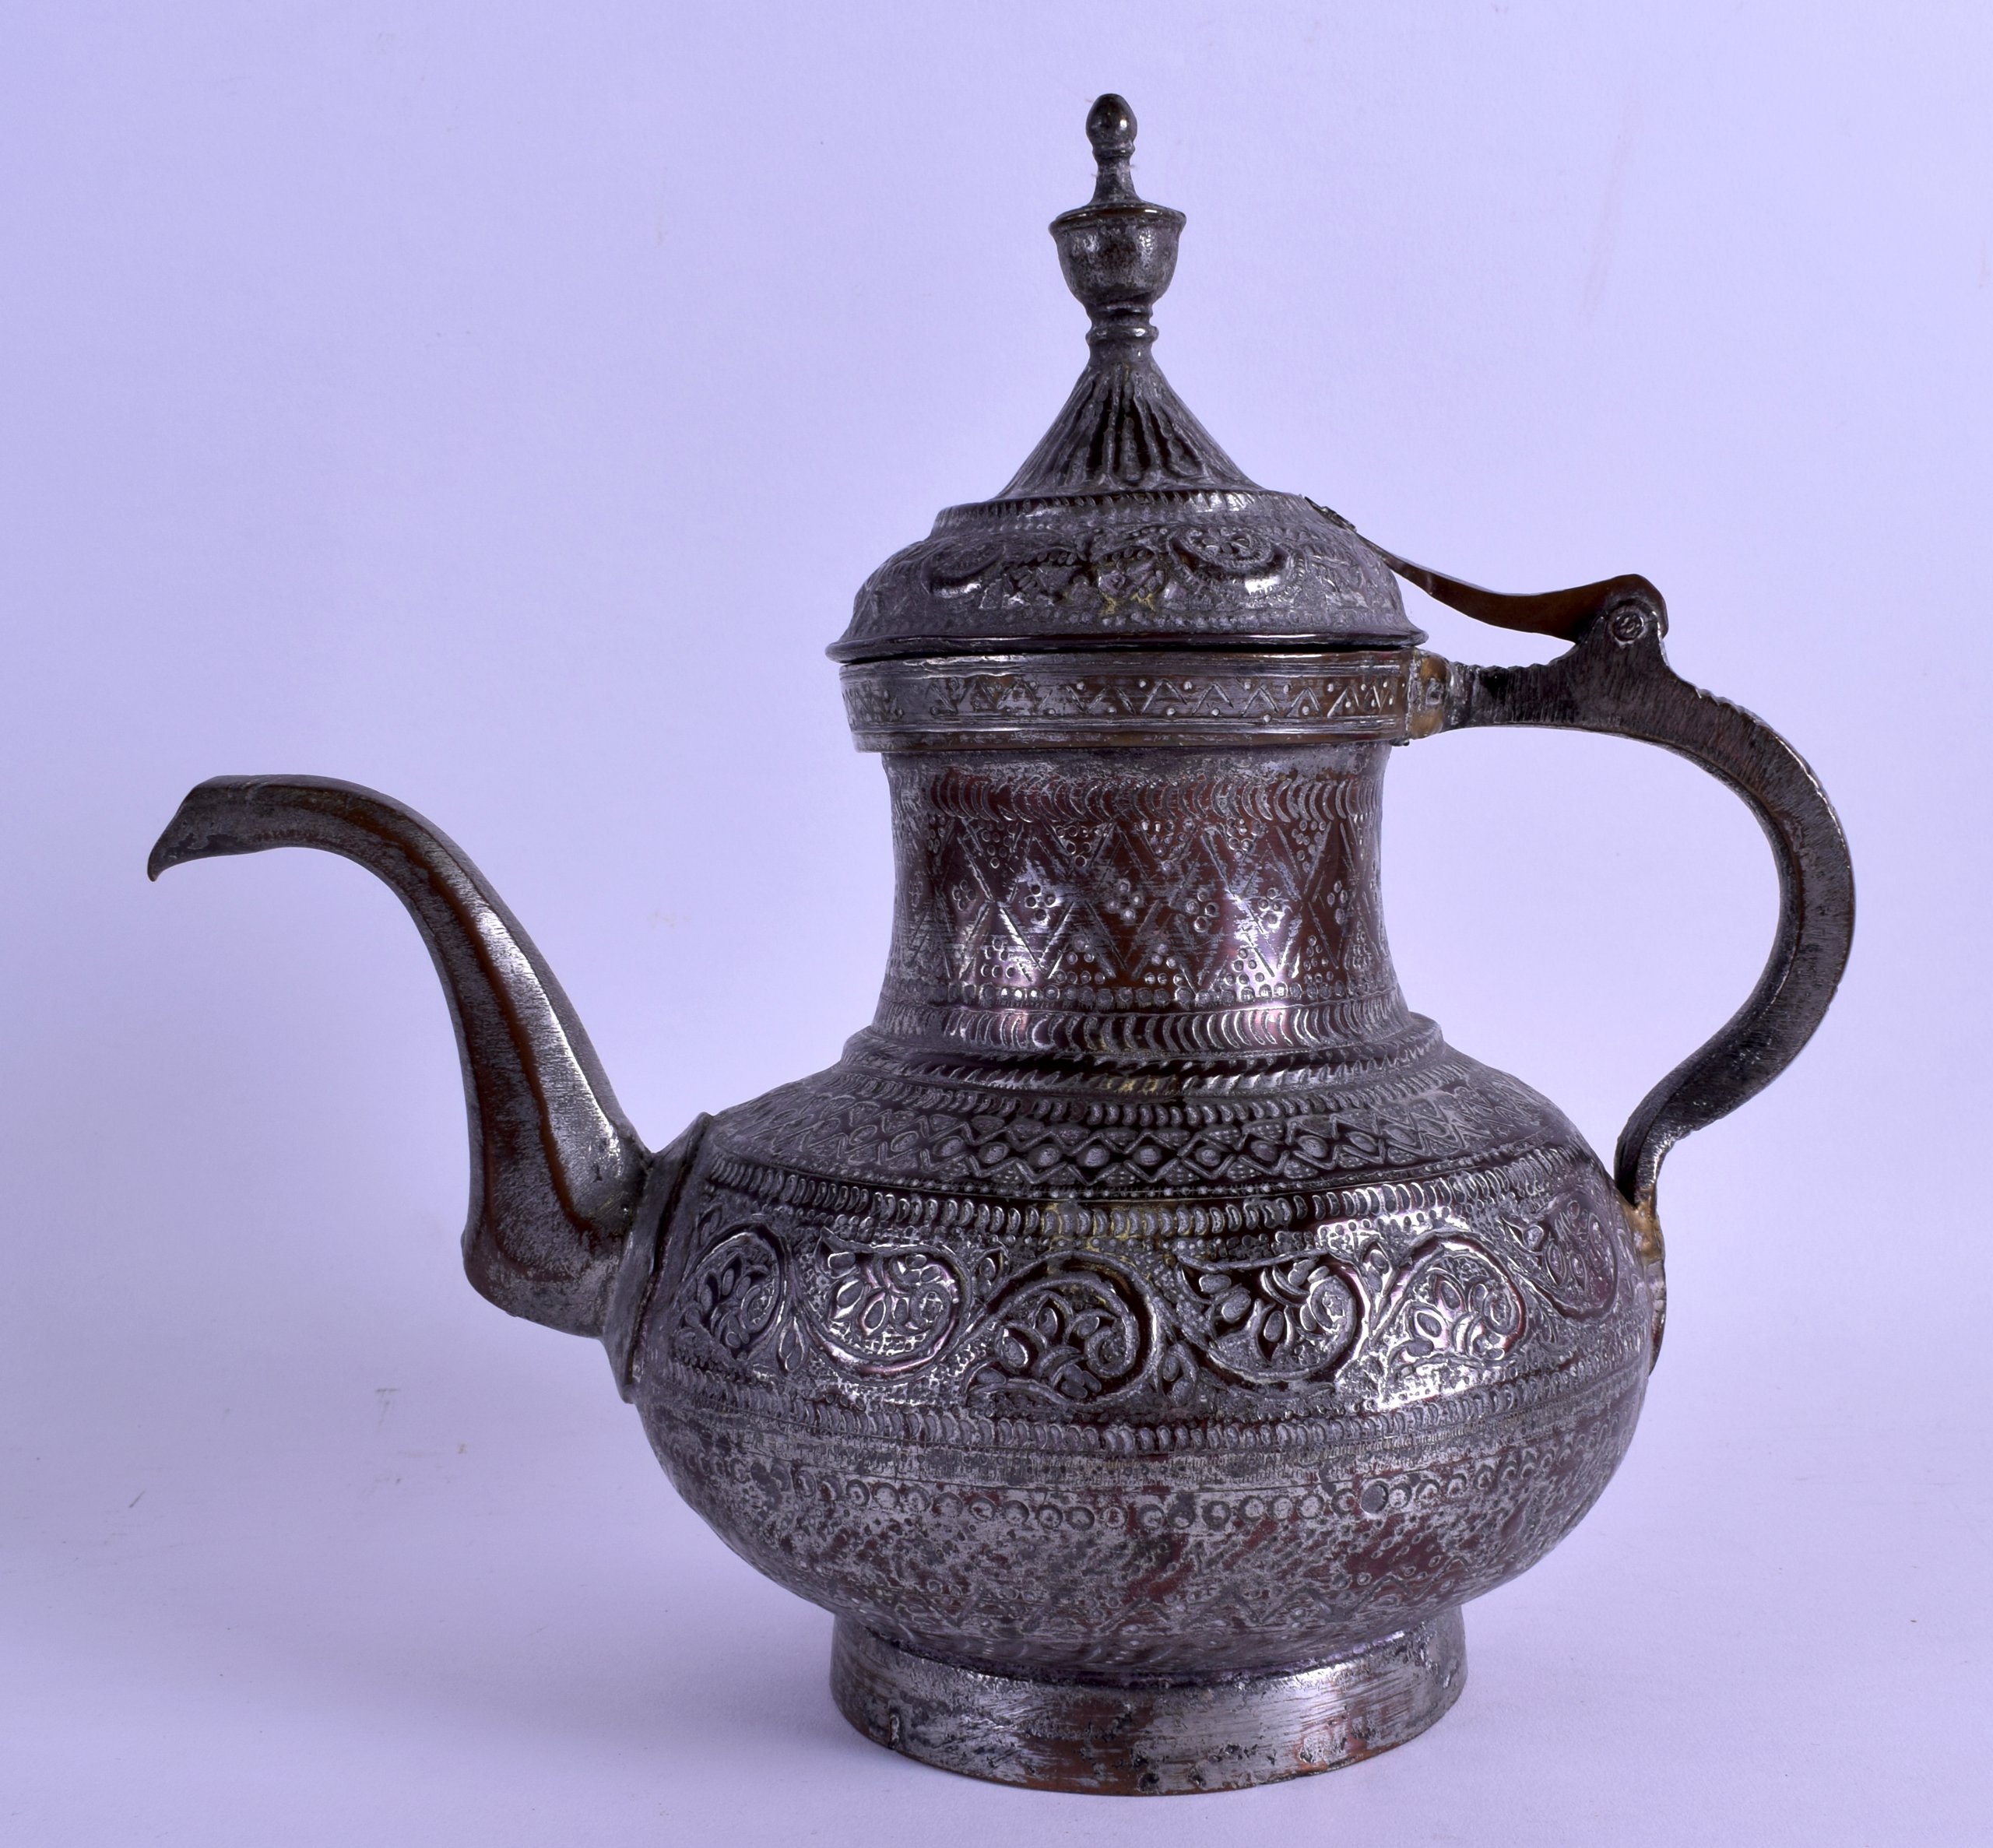 A LATE 19TH CENTURY INDIAN/PERSIAN MIXED ALLOY JUG decorated in relief with scrolling vines and